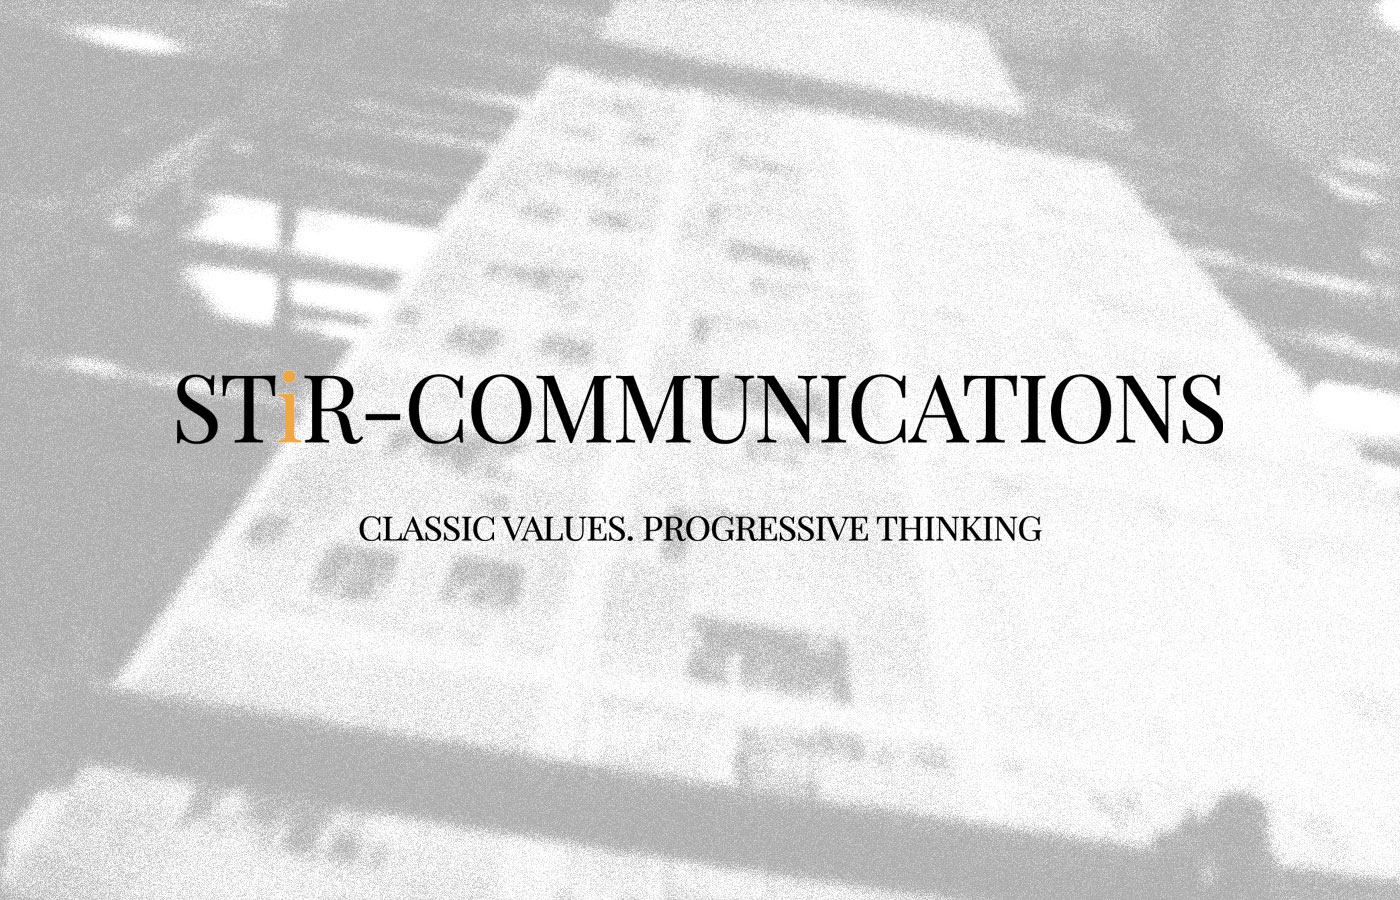 Text that says 'STiR Communications, classic values progressive thinking' overlayed on an image of a building.